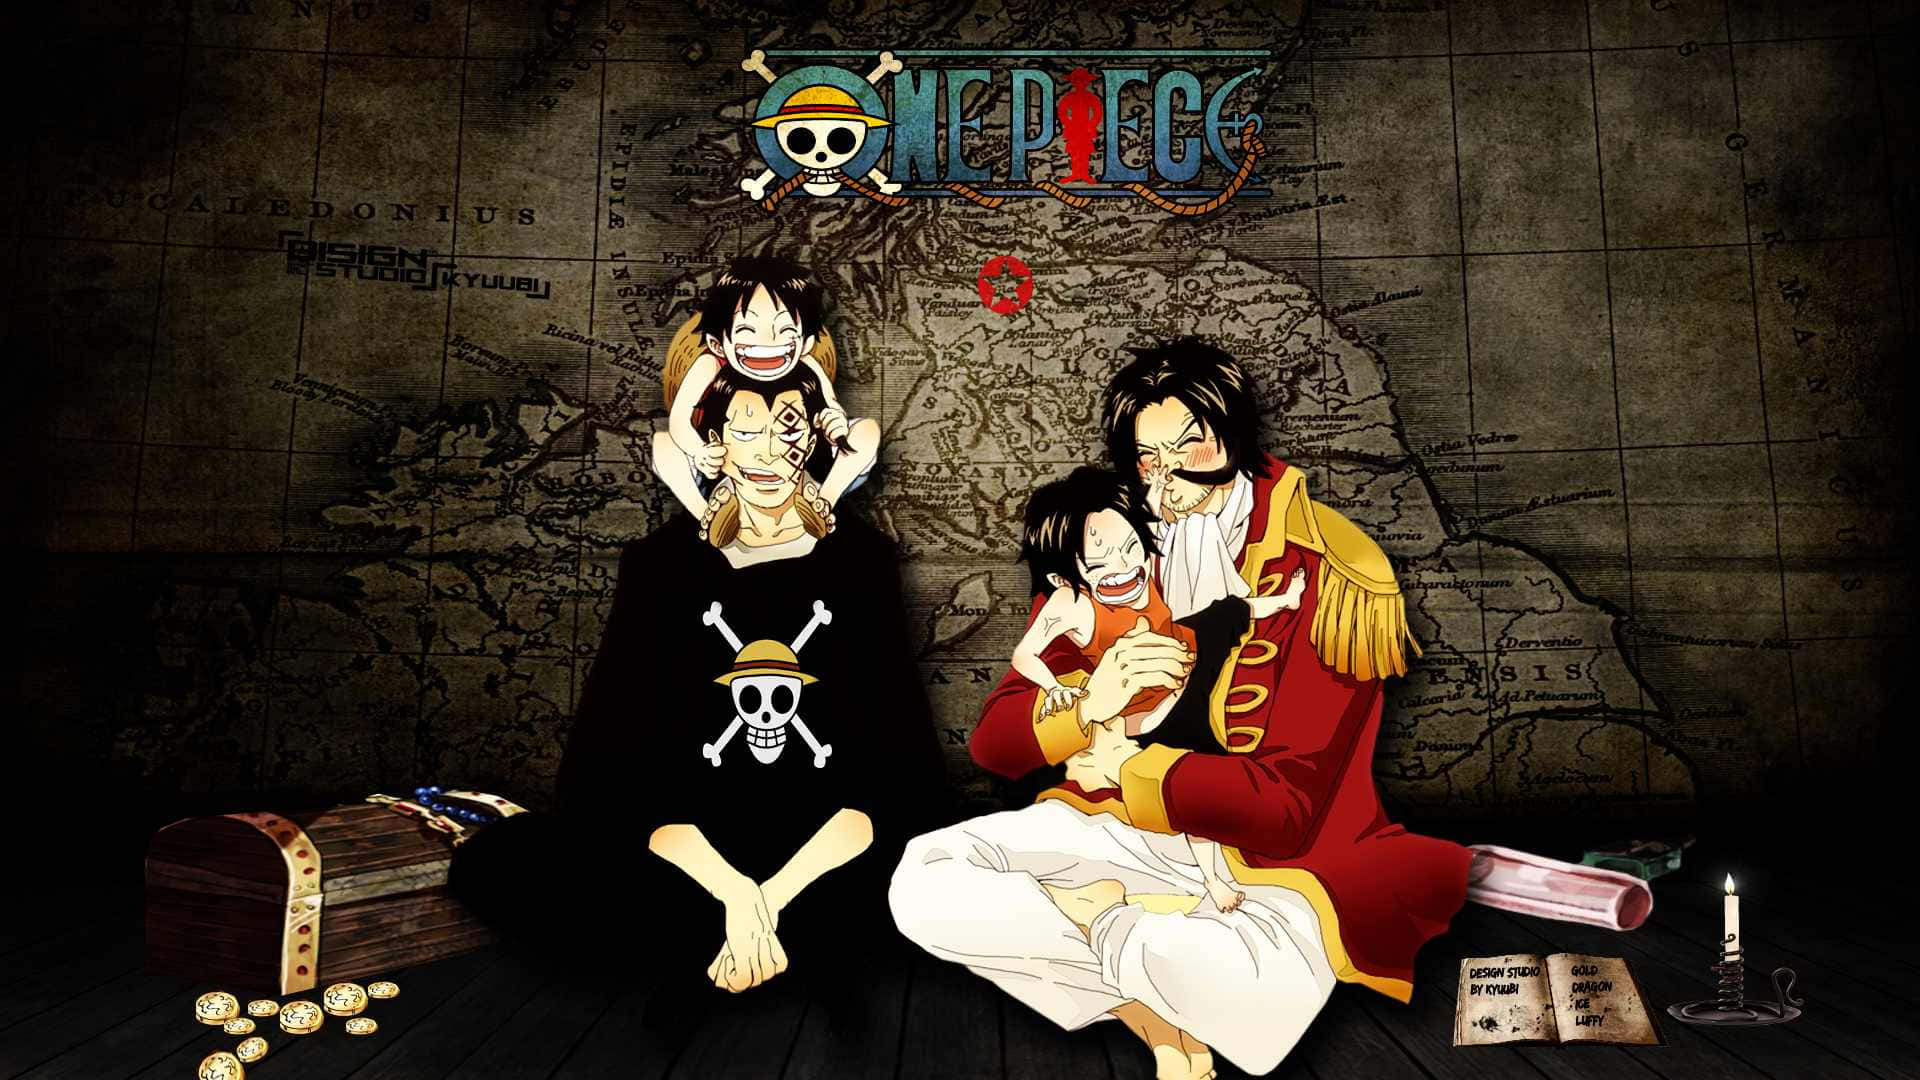 Check Out This Awesome Artwork Of Famous Pirate Luffy!